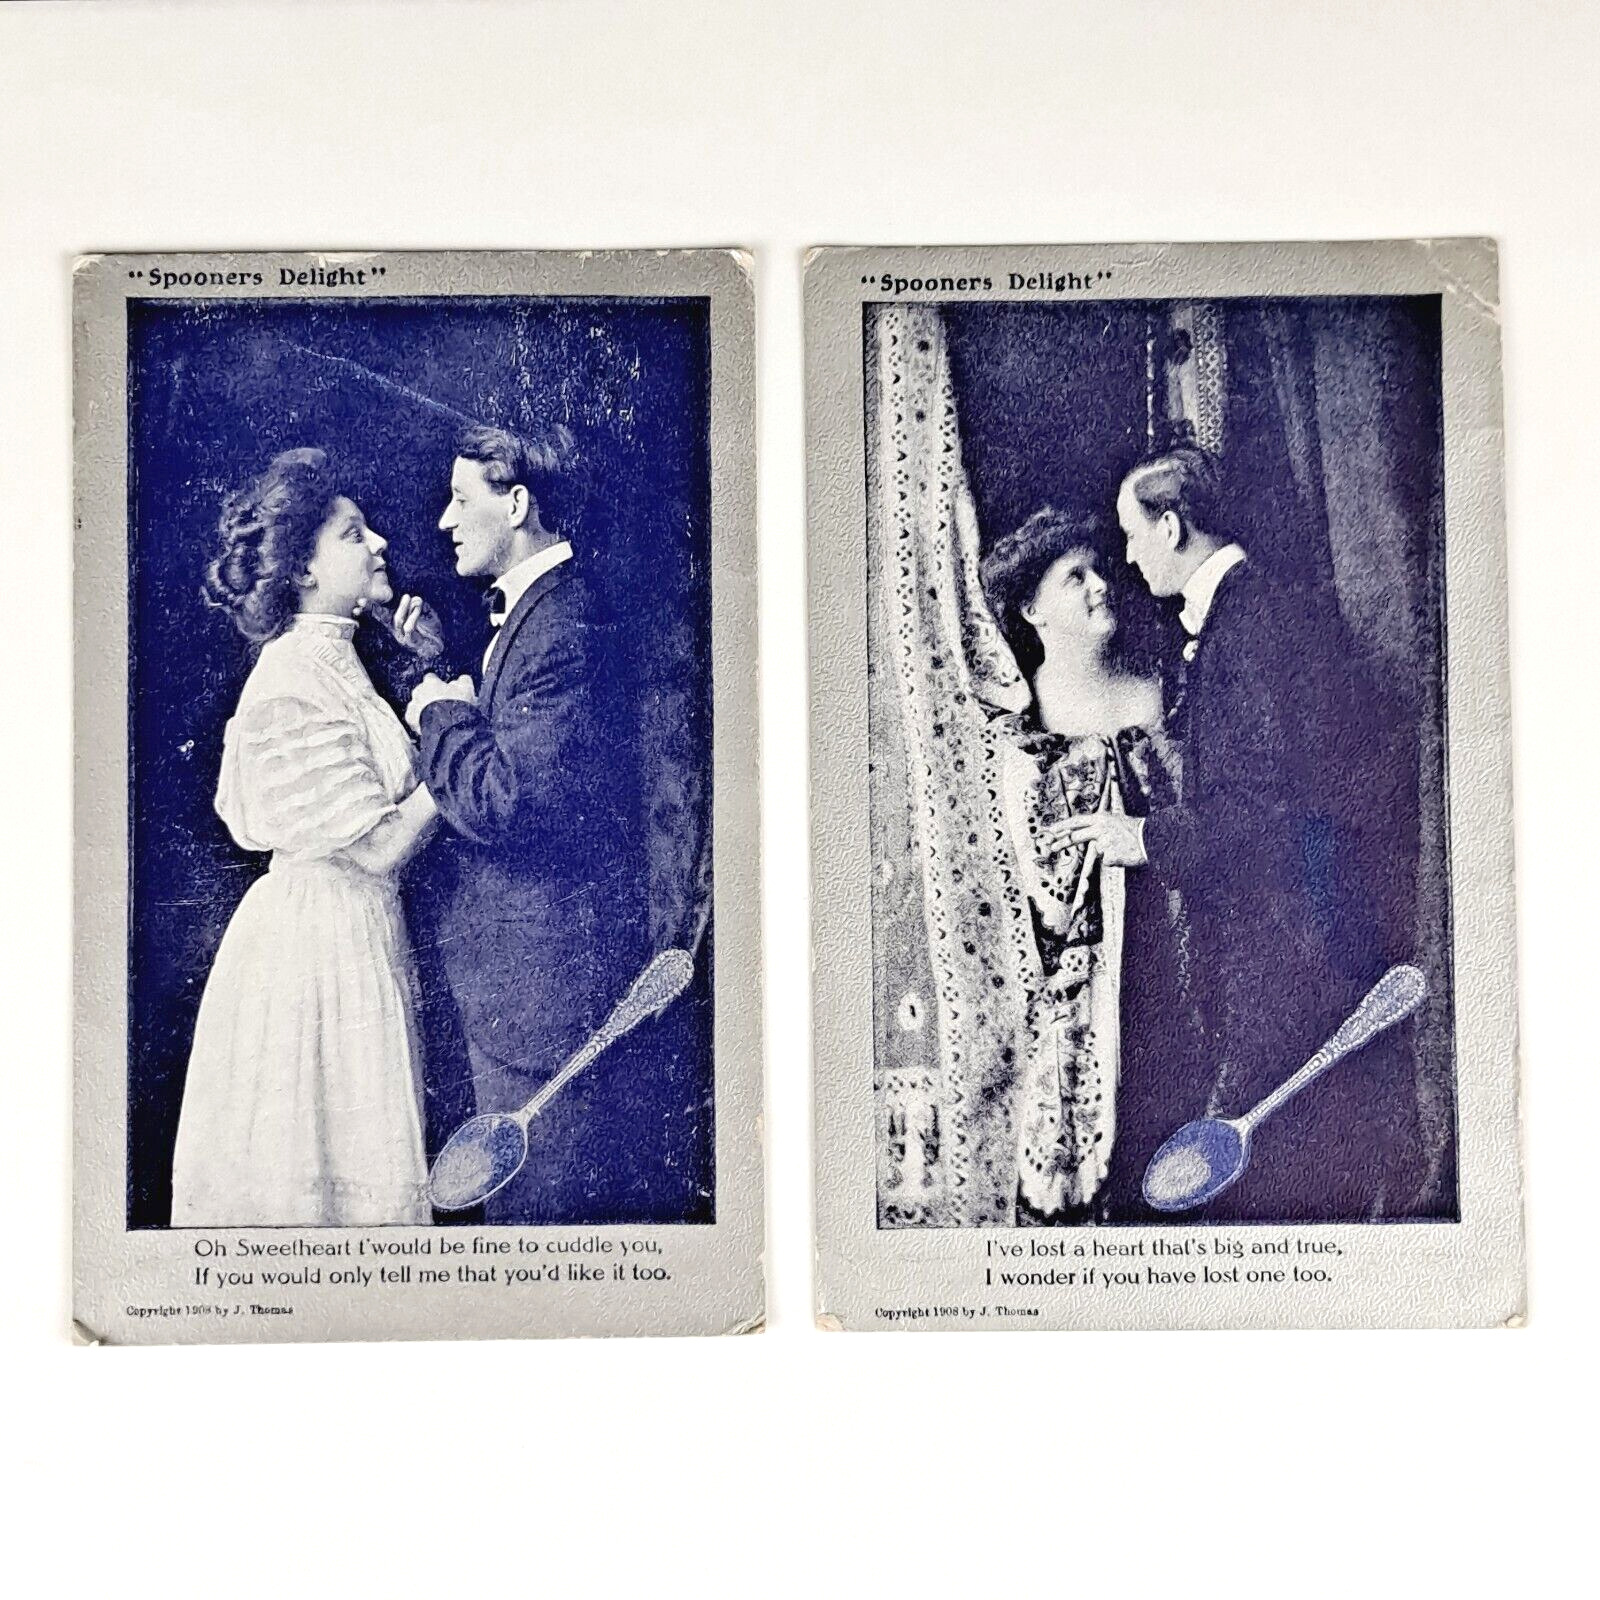 TWO ANTIQUE 1908 REAL PHOTO SPOONER'S DELIGHT J. THOMAS RPPC POSTCARDS - POSTED